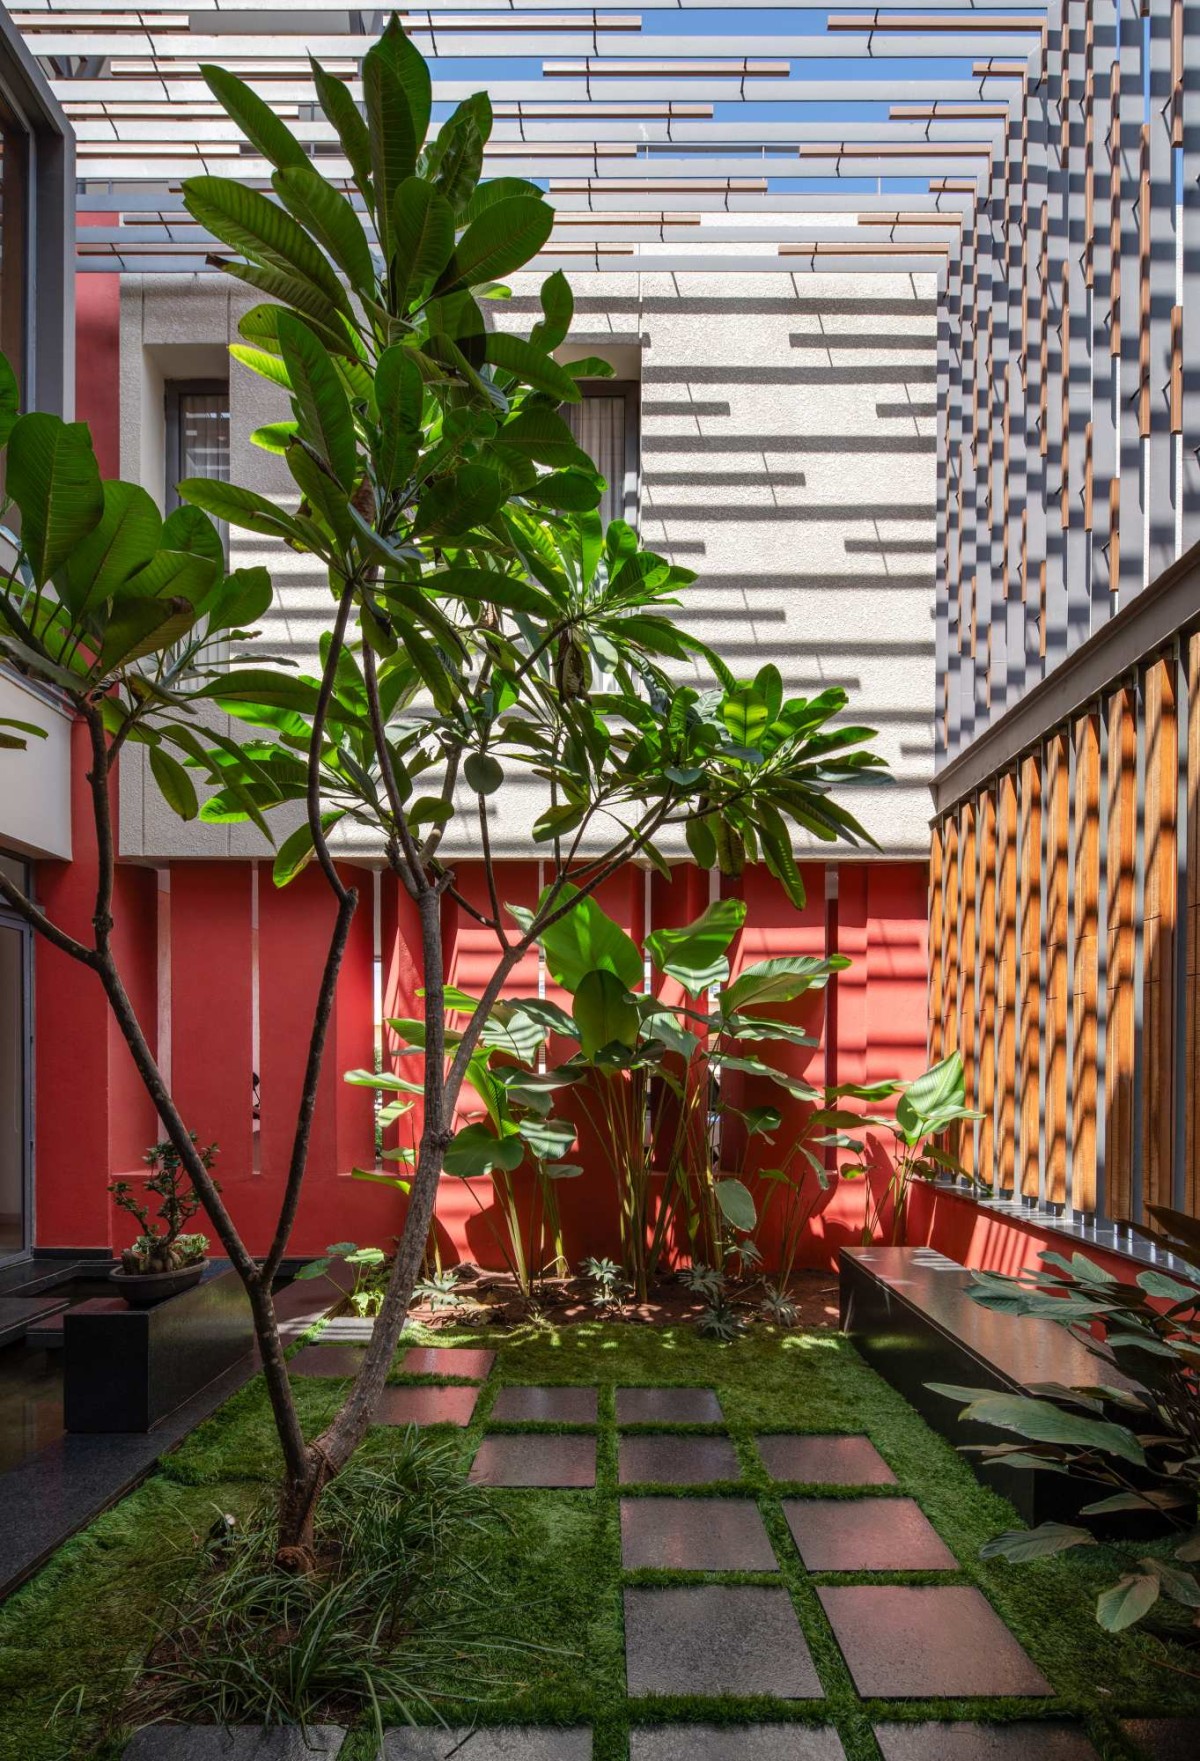 Courtyard shadow play of The Red Courtyard House by Jacob + Rathodi Architects